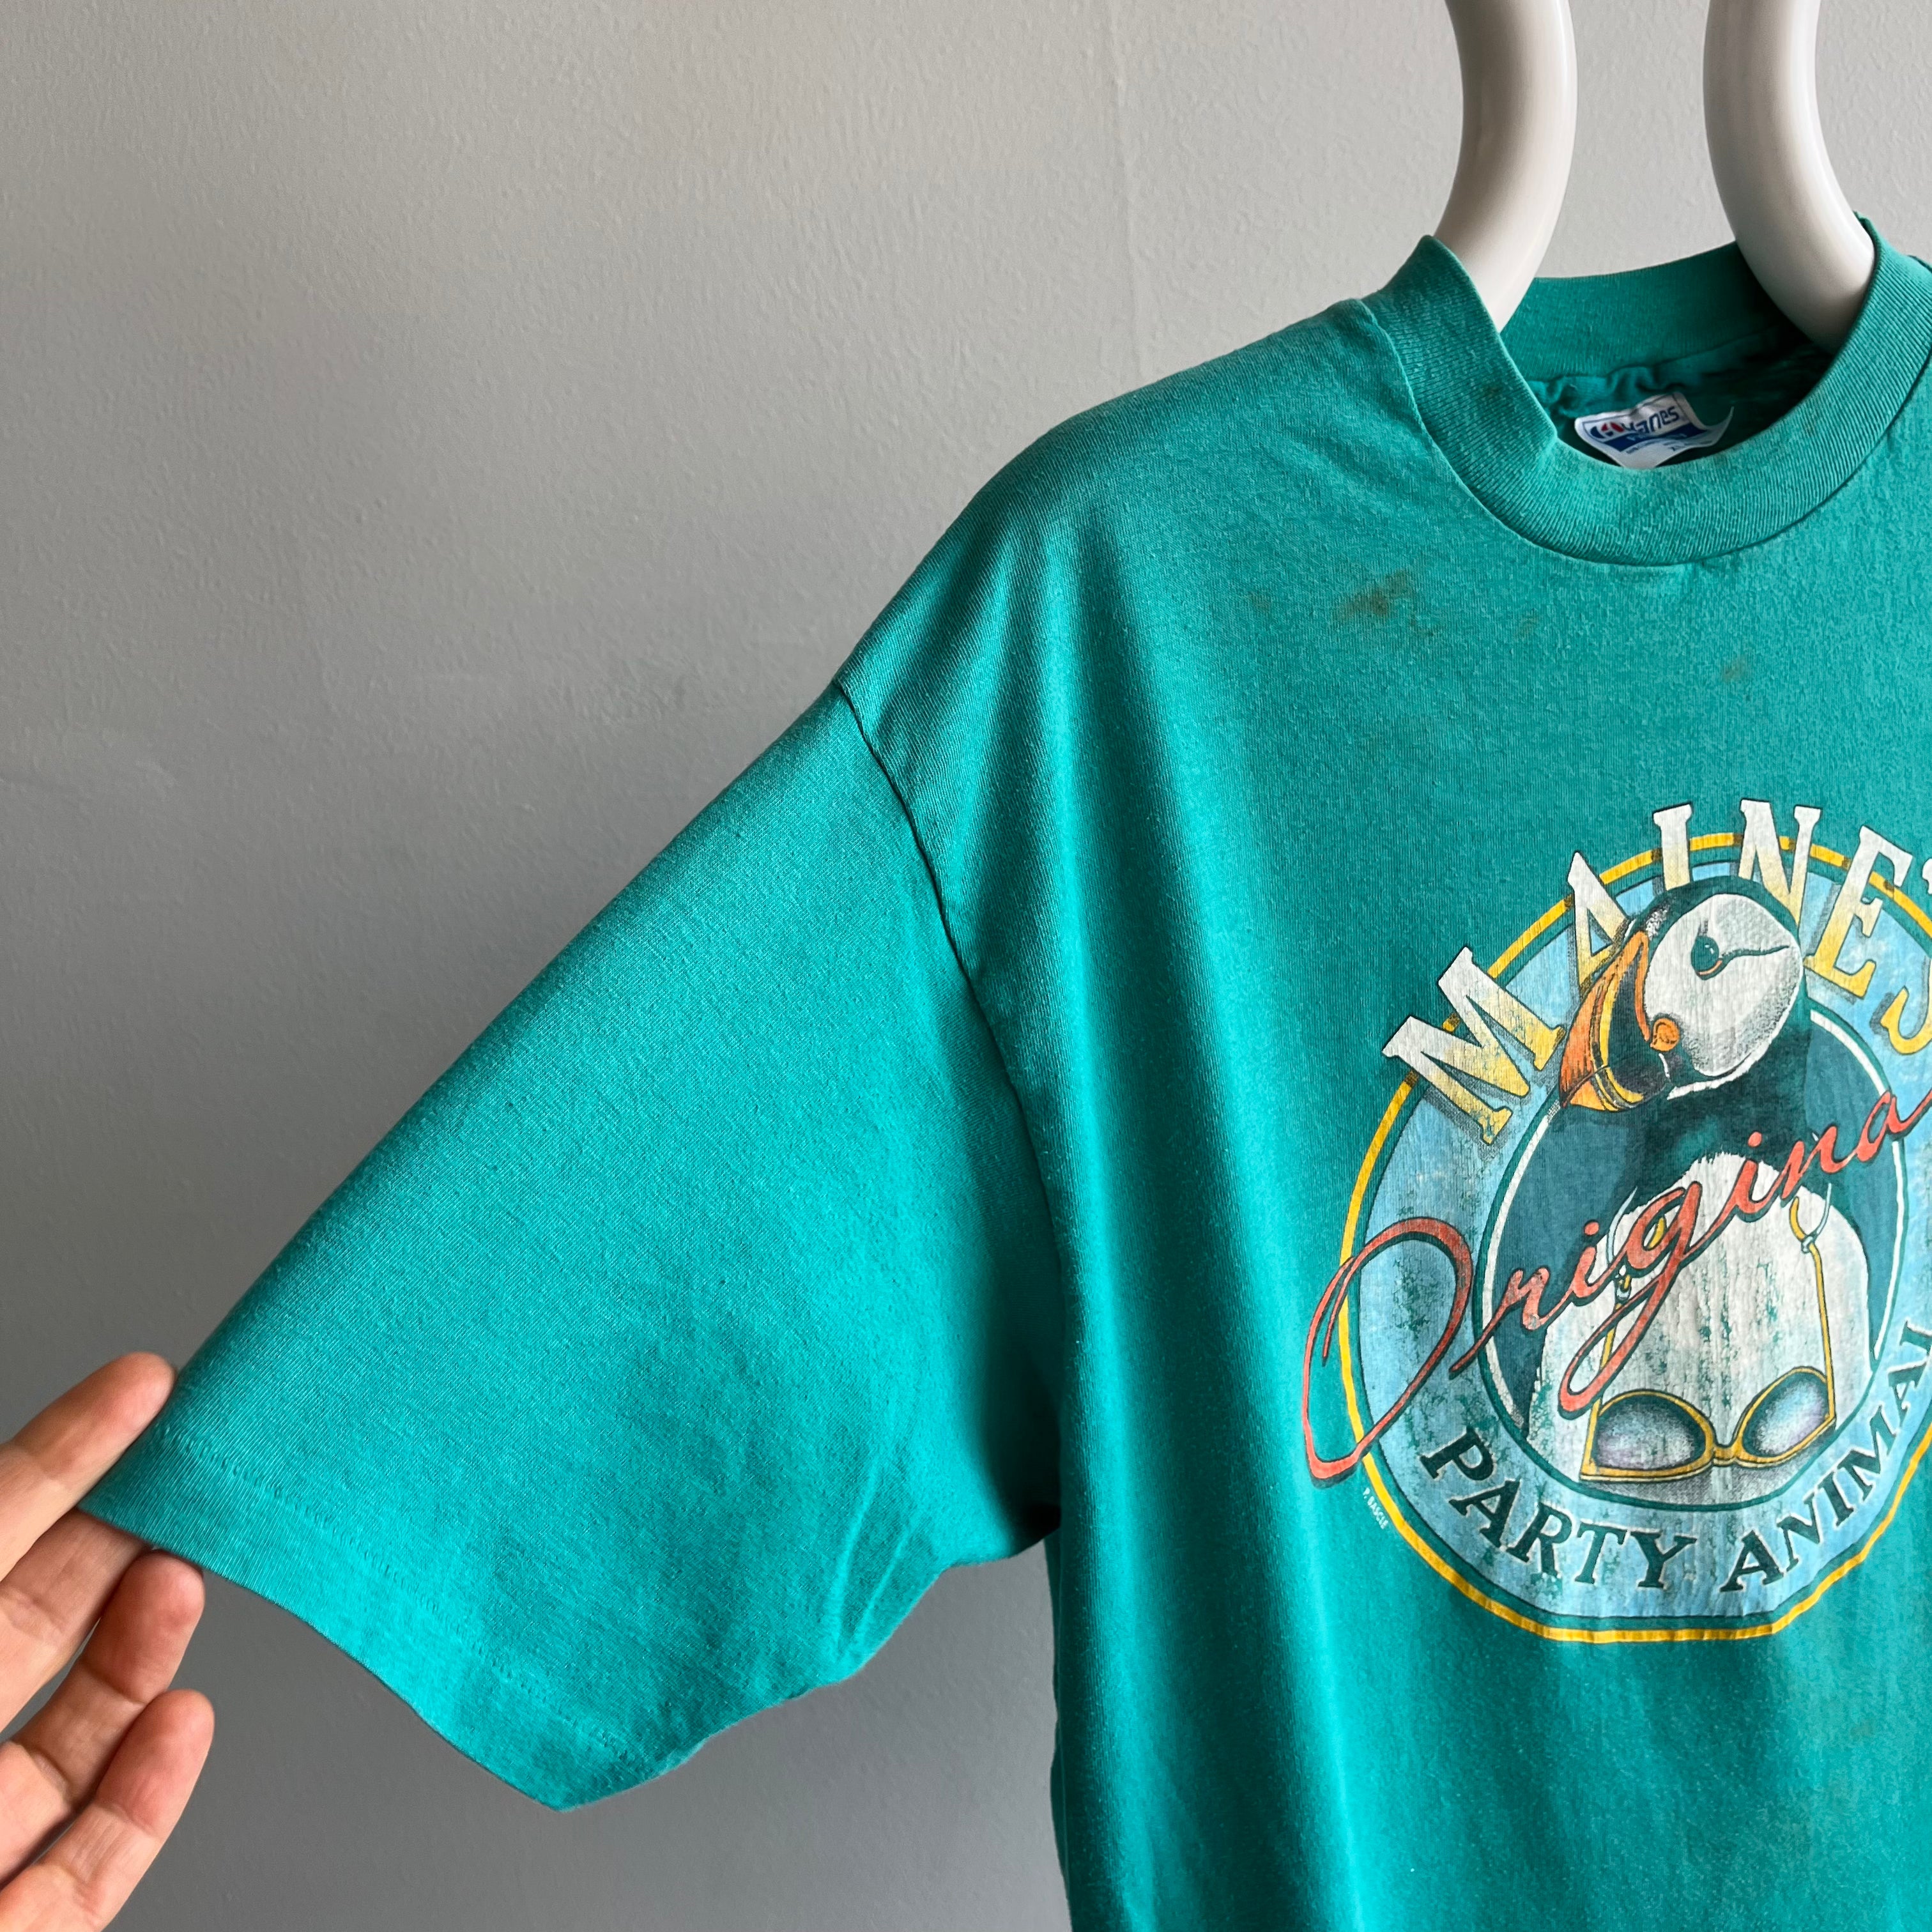 1987 Maine's Original Party Animal - Stained T-SHirt